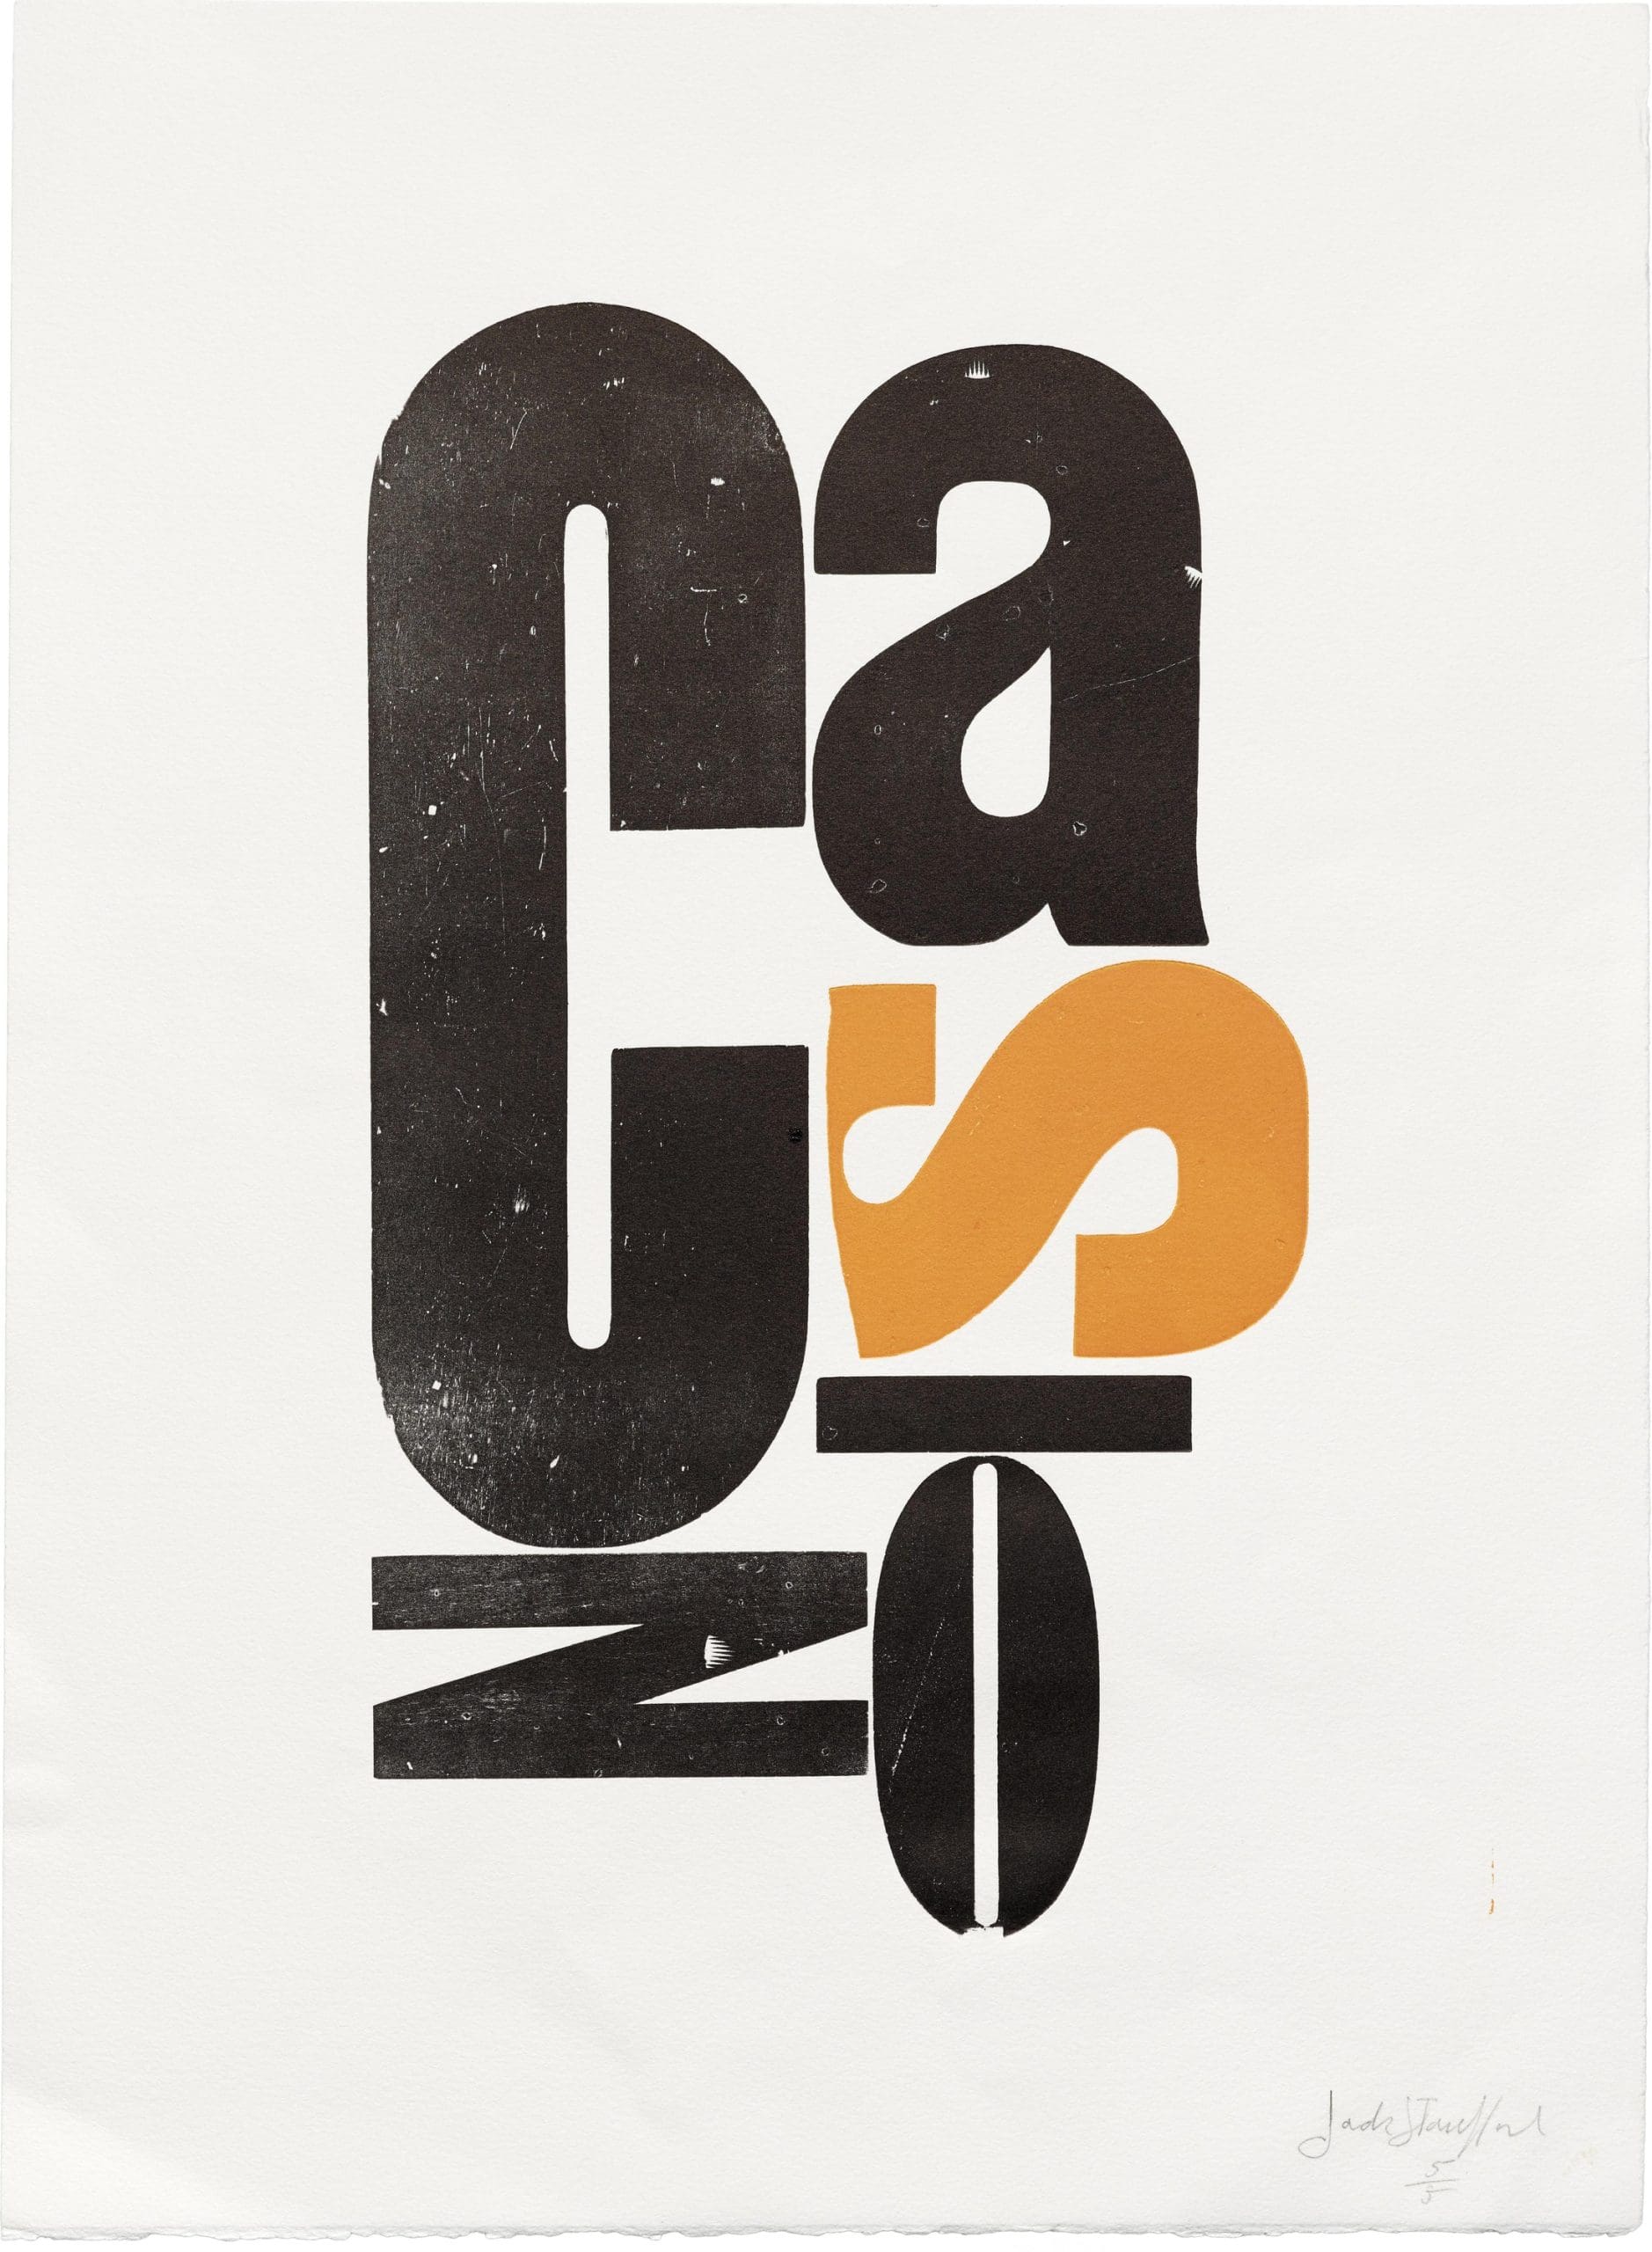 The word "Casino" is written in a deconstructed manner, in black and yellow.